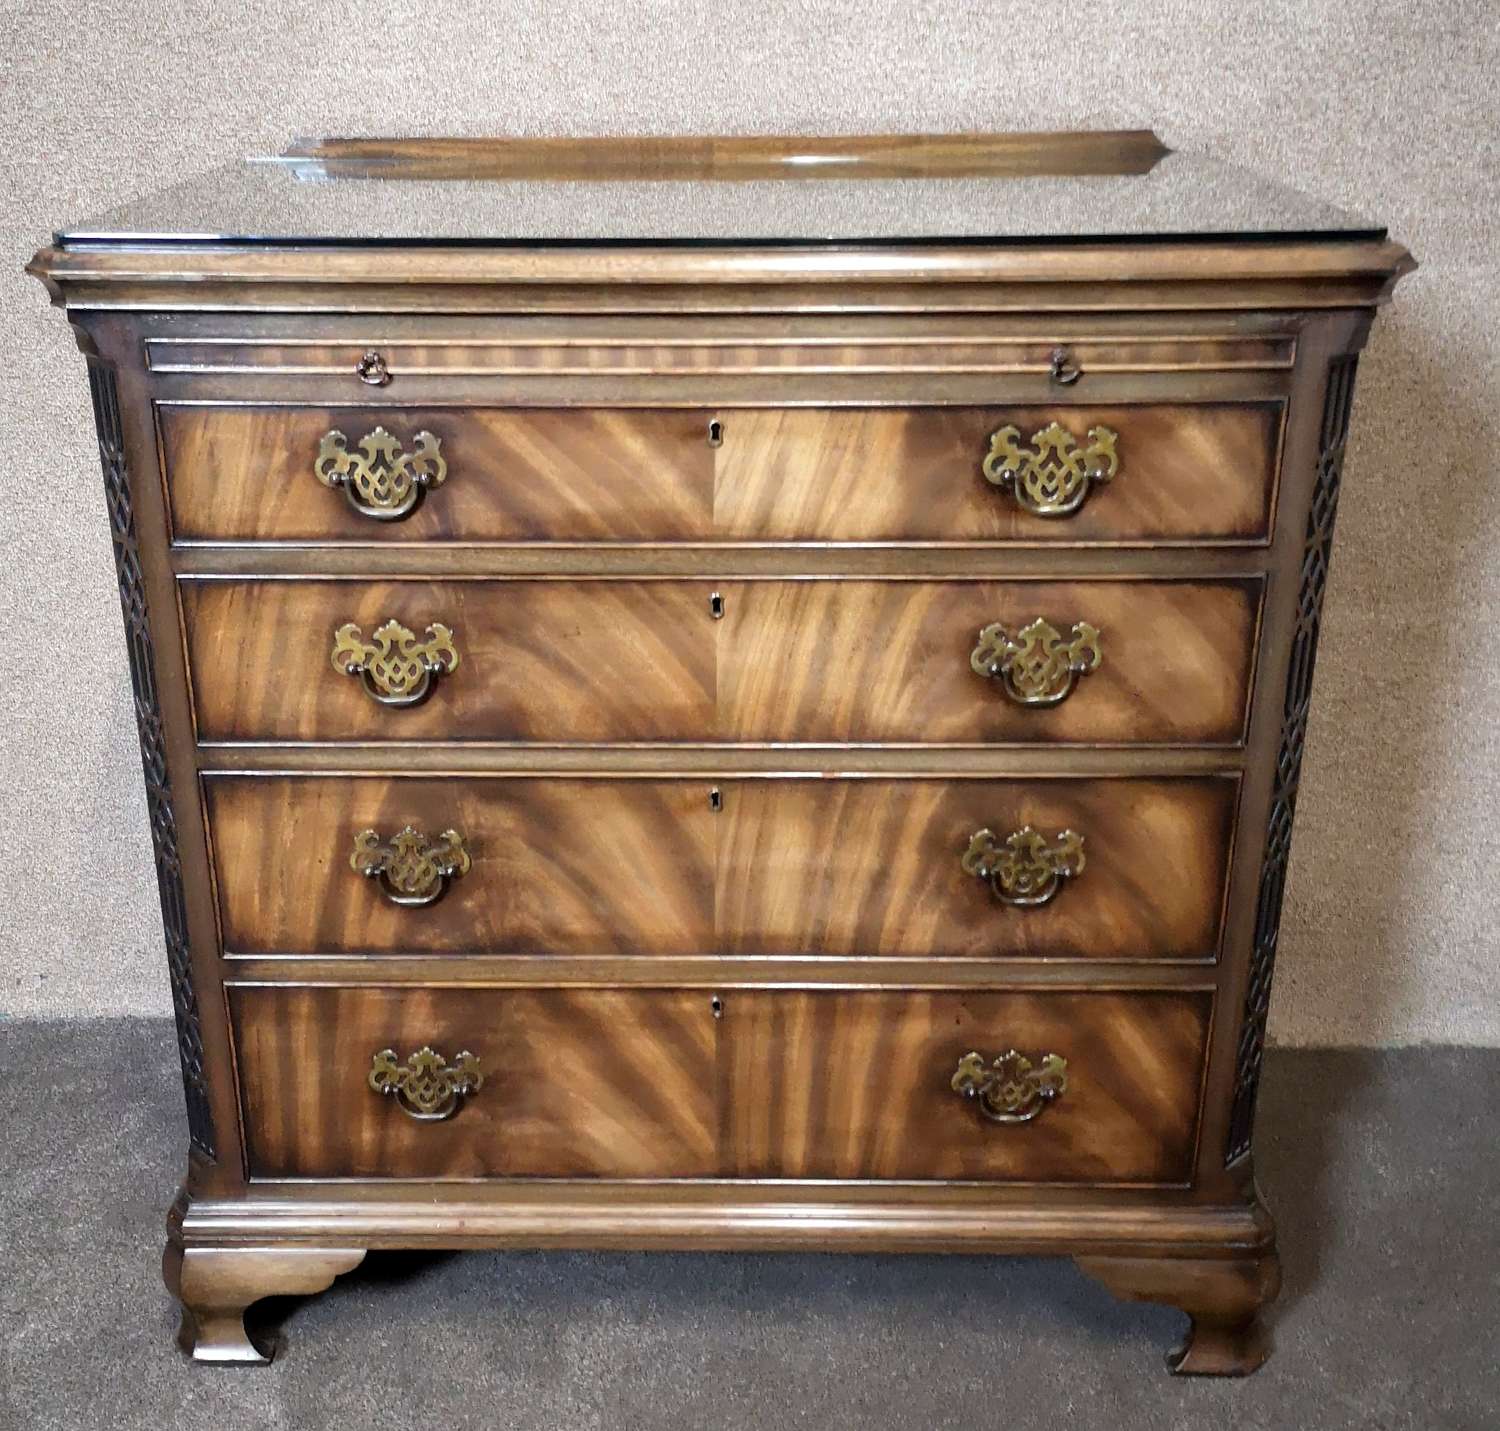 Mahogany Chest of Drawers In The Chippendale Style